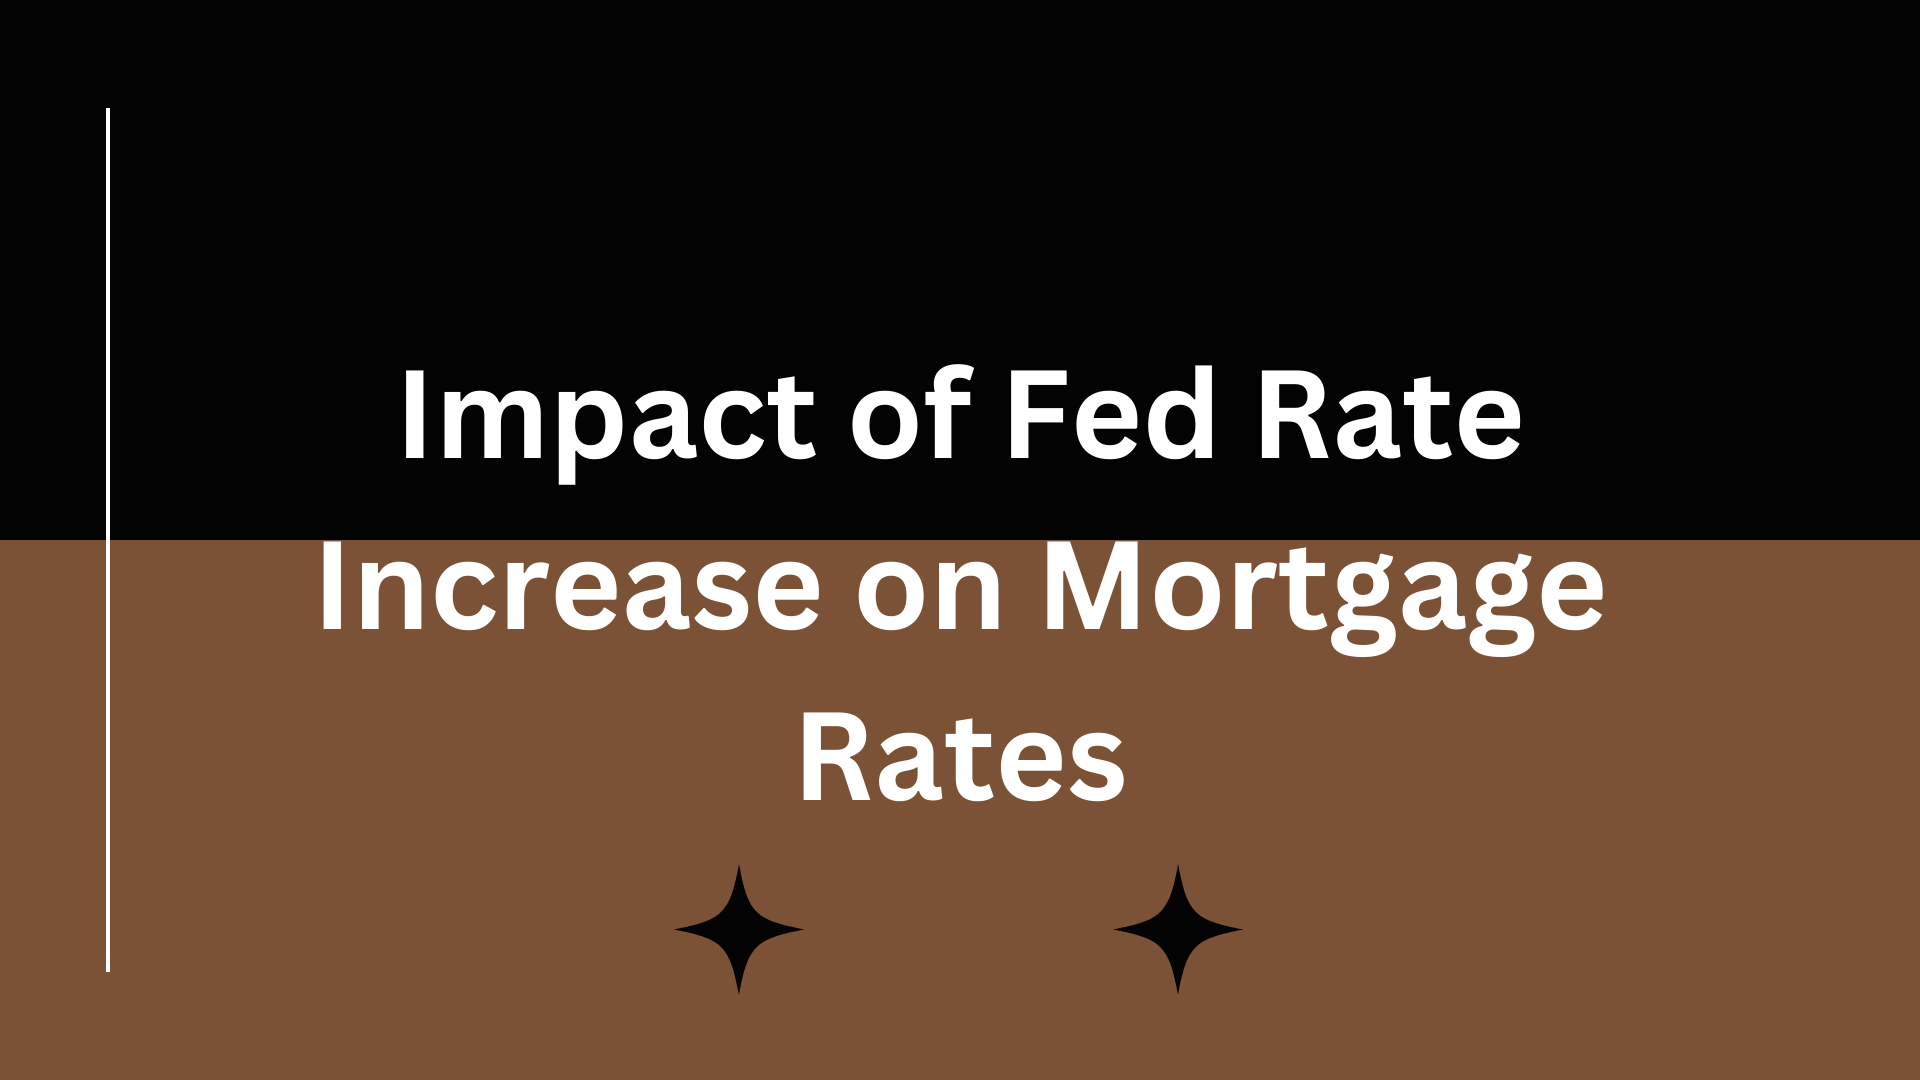 Impact of Fed Rate Increase on Mortgage Rates